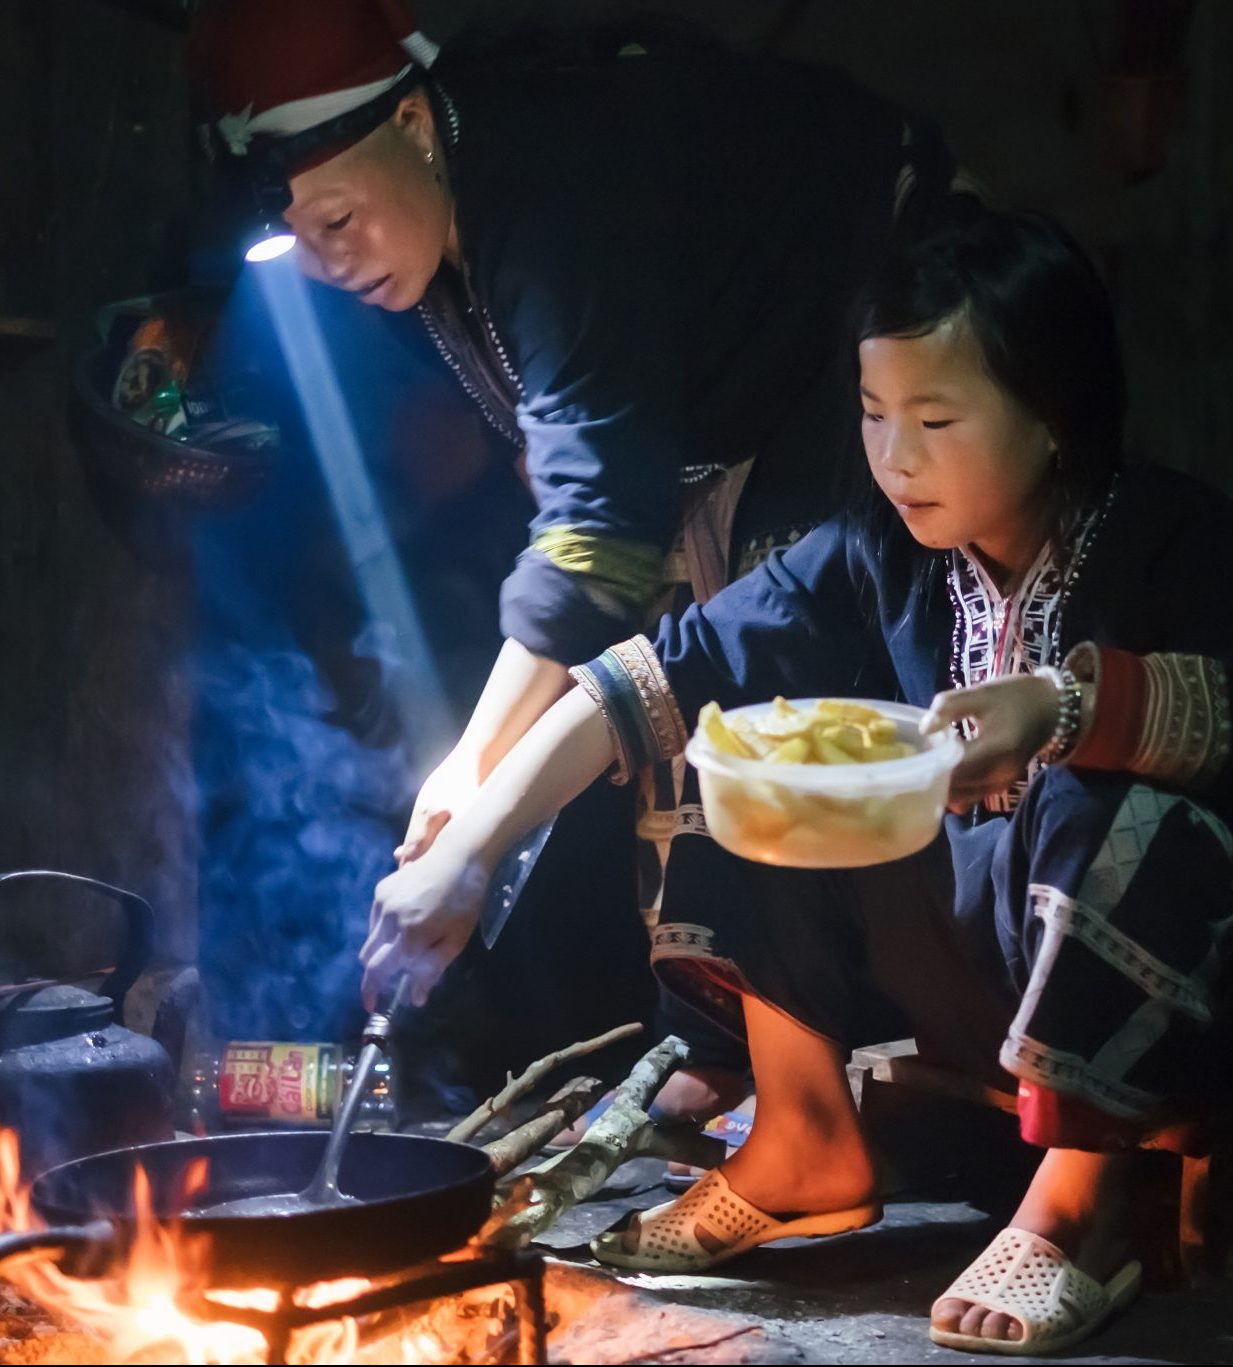 Man and woman cooking over open fire